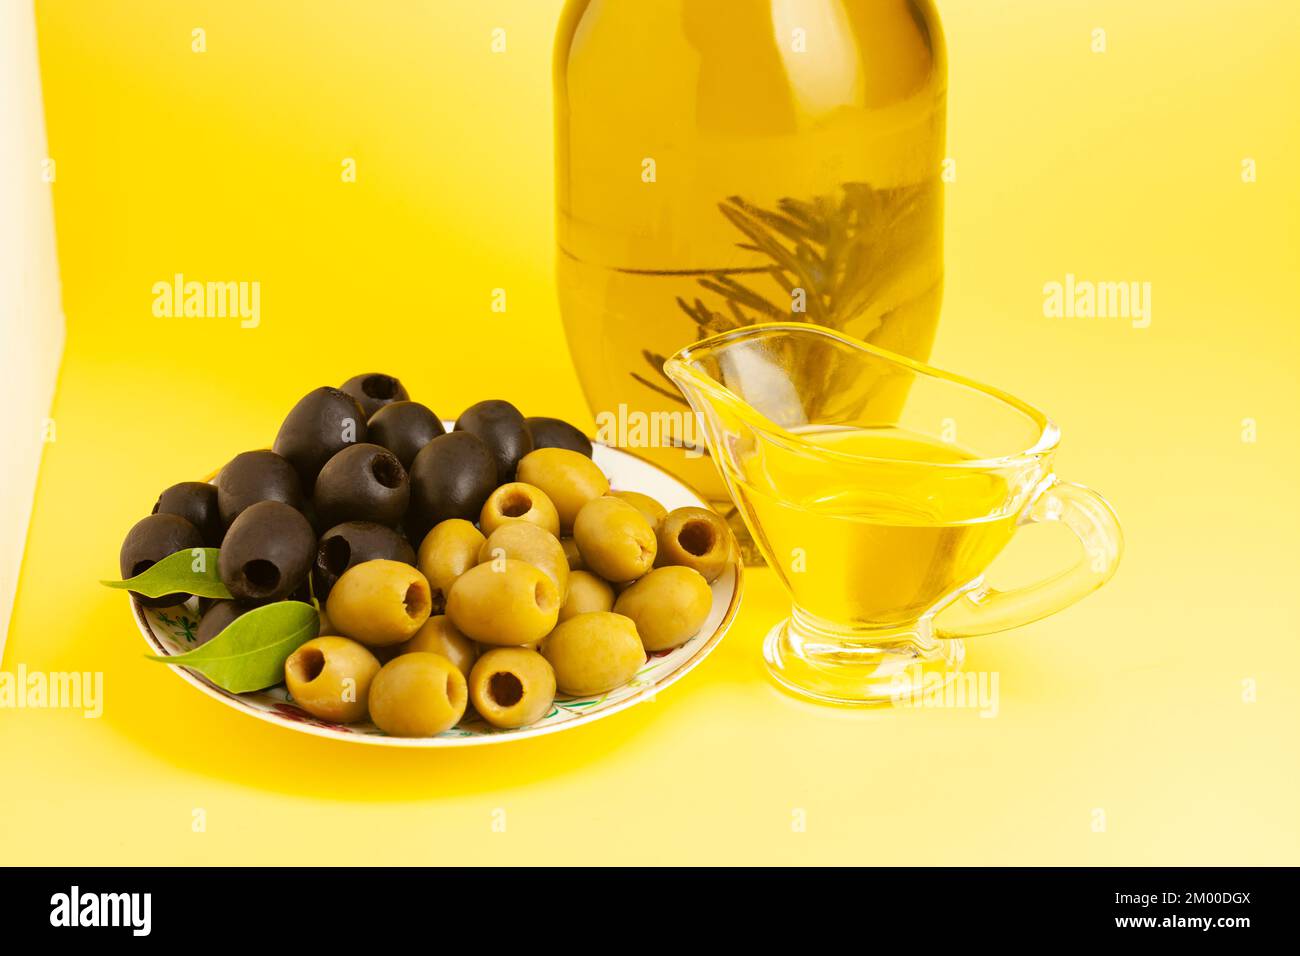 Jug with olive oil, green and black olives on yellow background Stock Photo